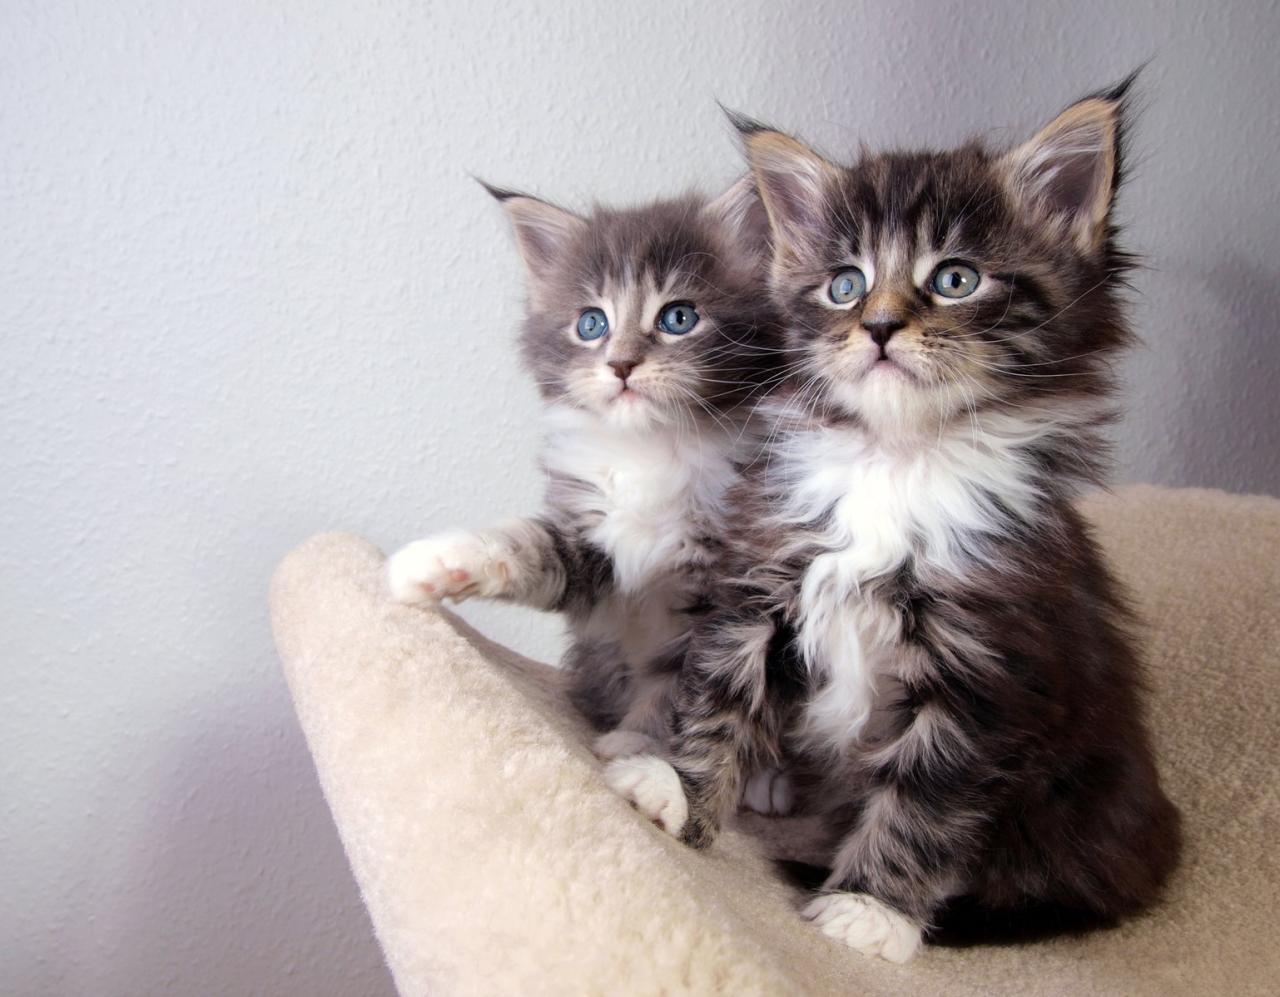 Maine coon kittens kitten cute adorable coons giants actually cutest old tiny making absolutely winston think last his model life